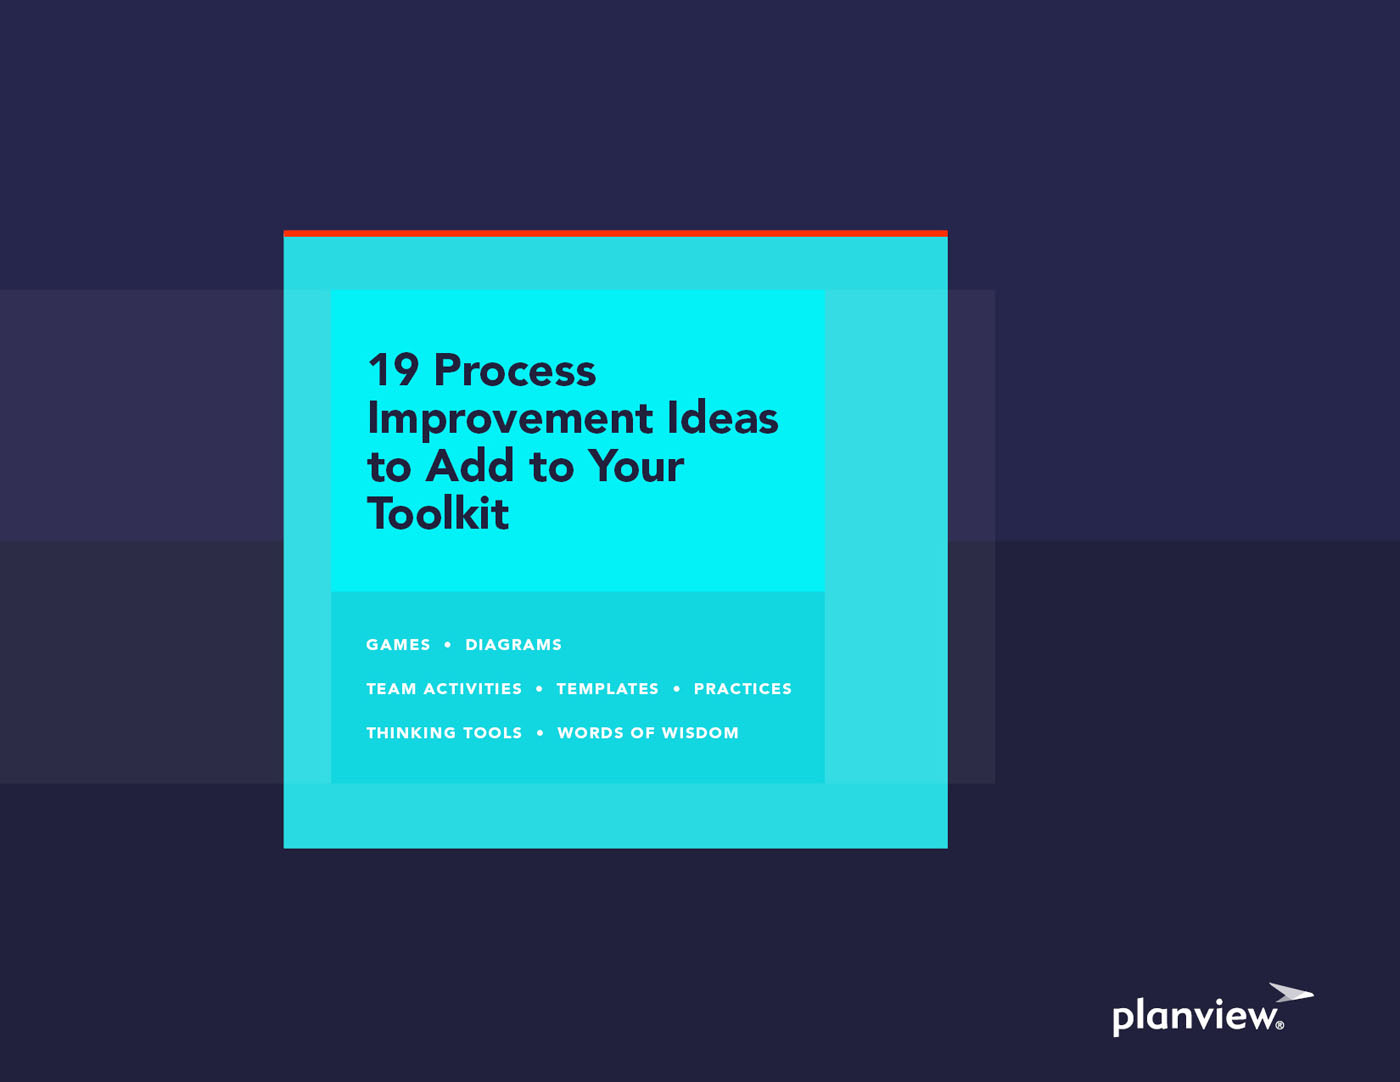 19 Process Improvement Ideas to Add to Your Toolkit